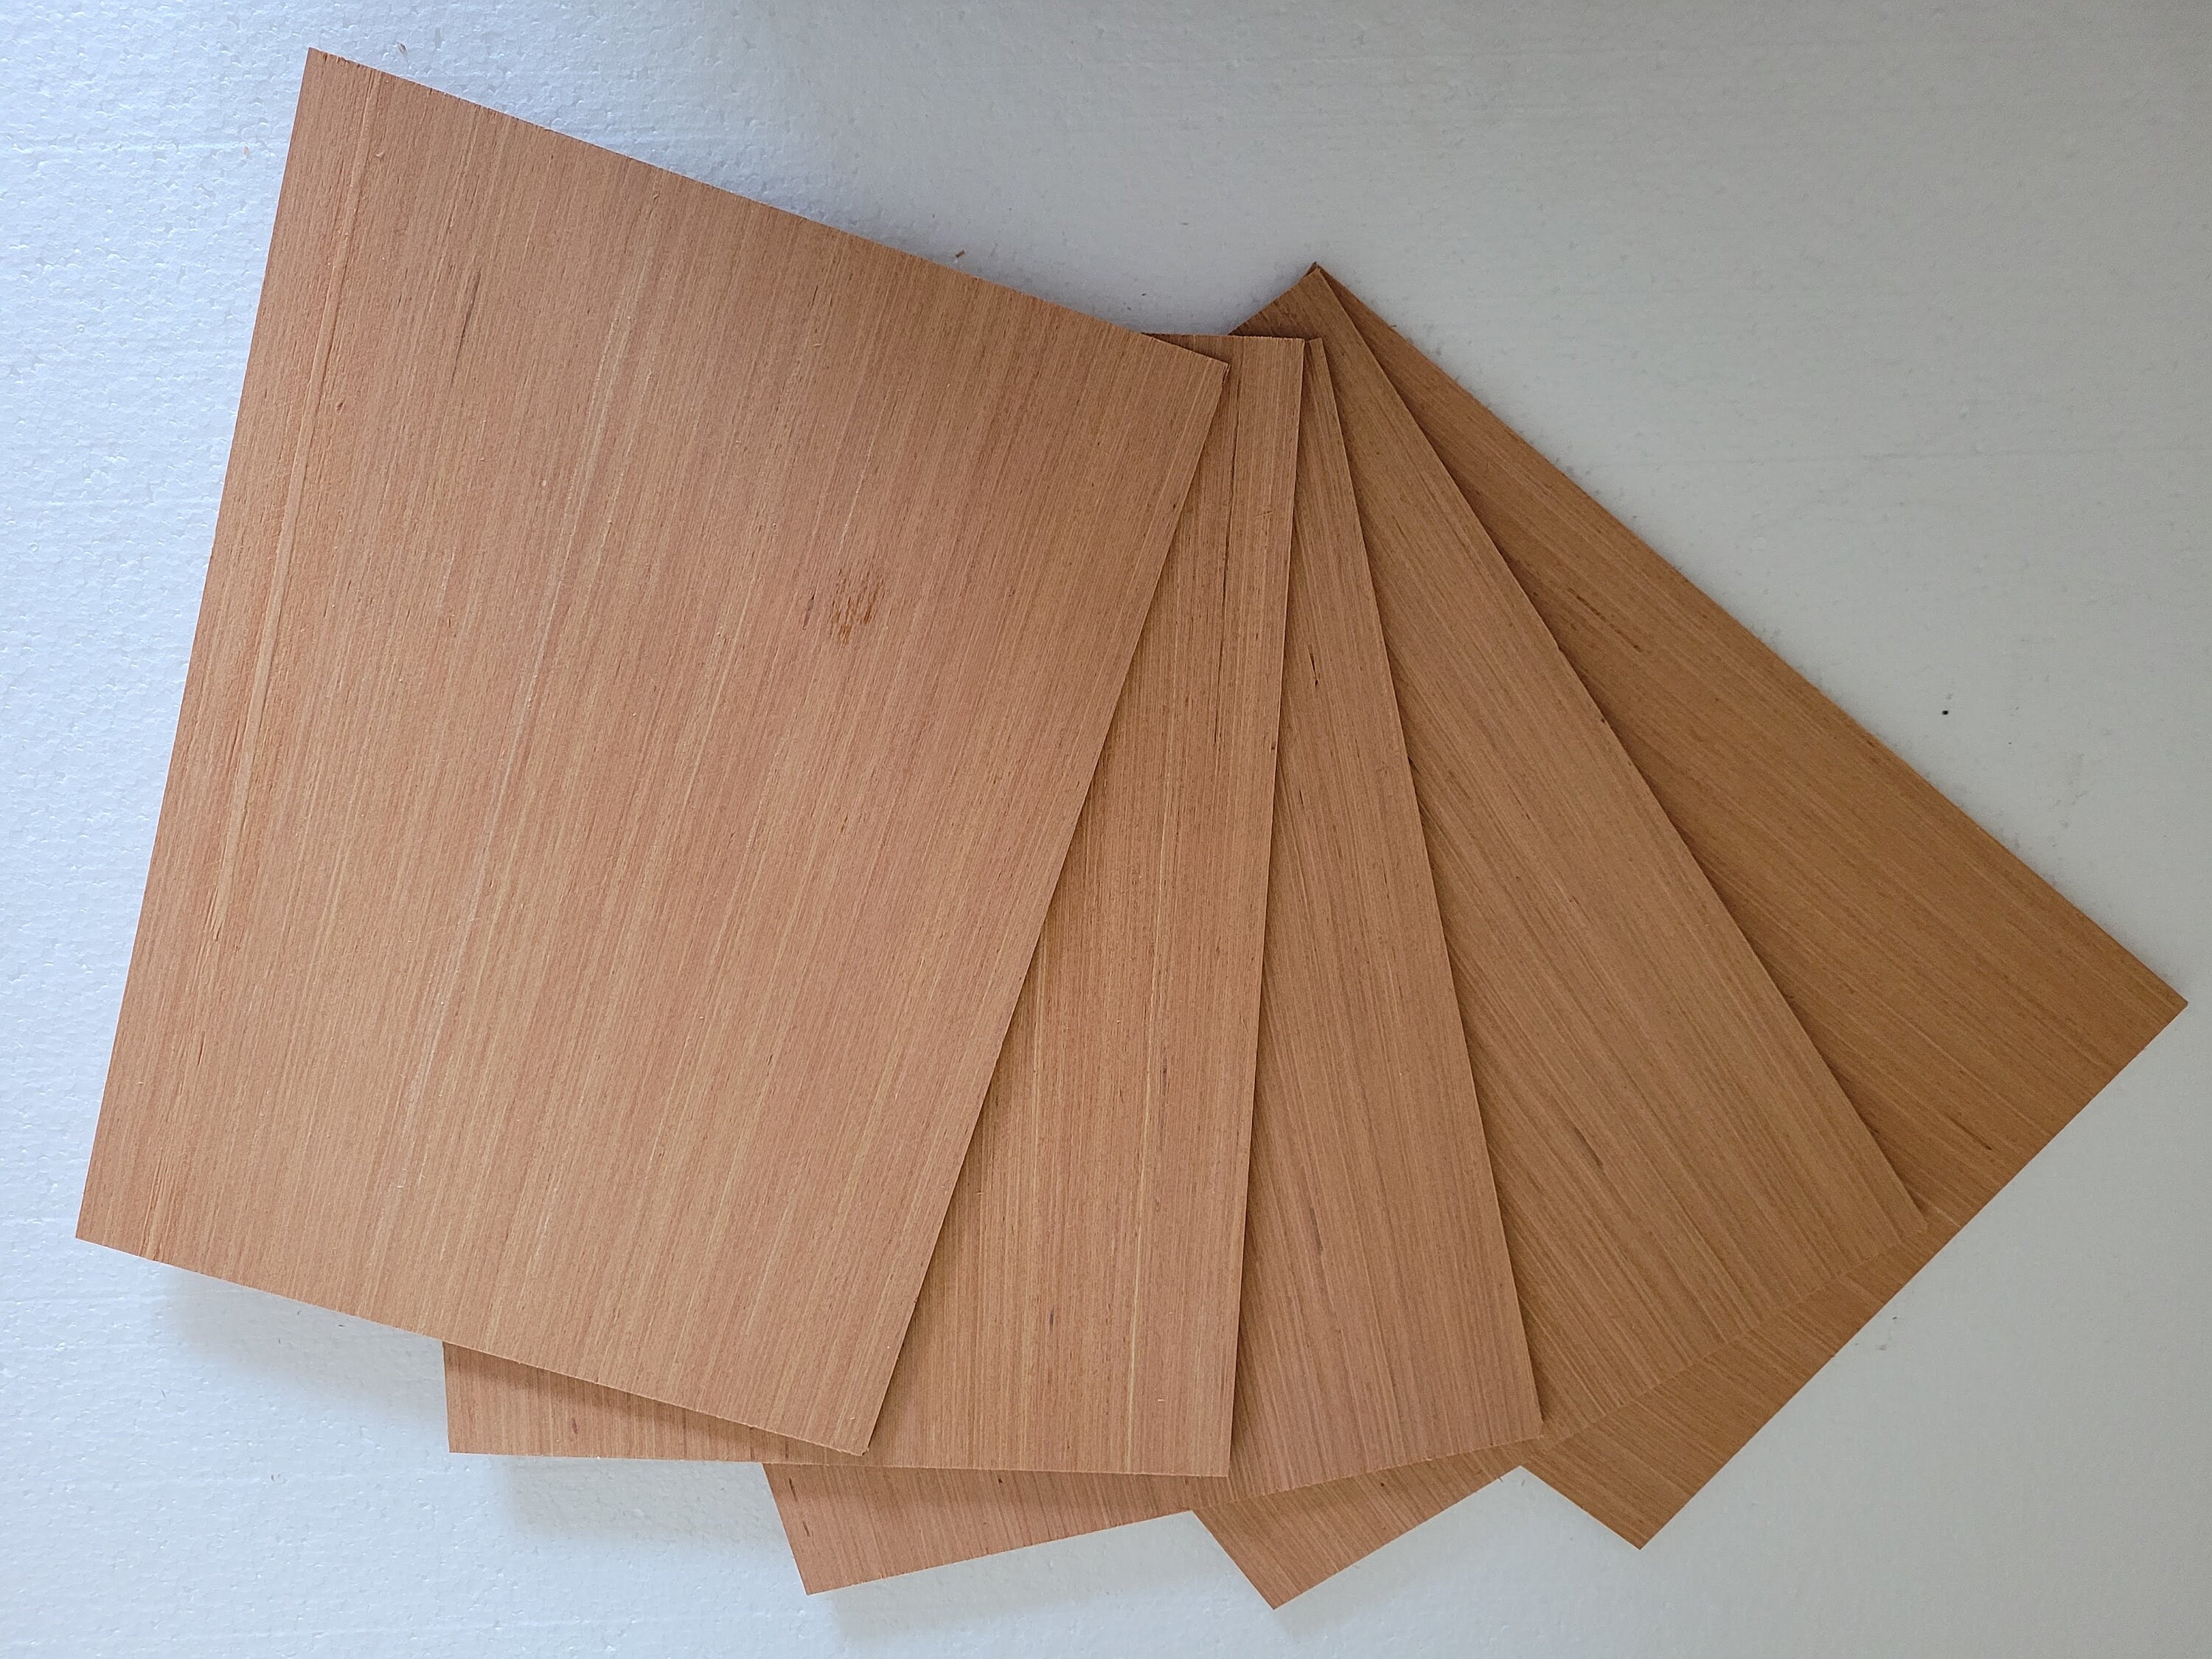 Cherry Wood Strips 5 Pieces 1/8 X 1/4 X 18 Long Crafts Models